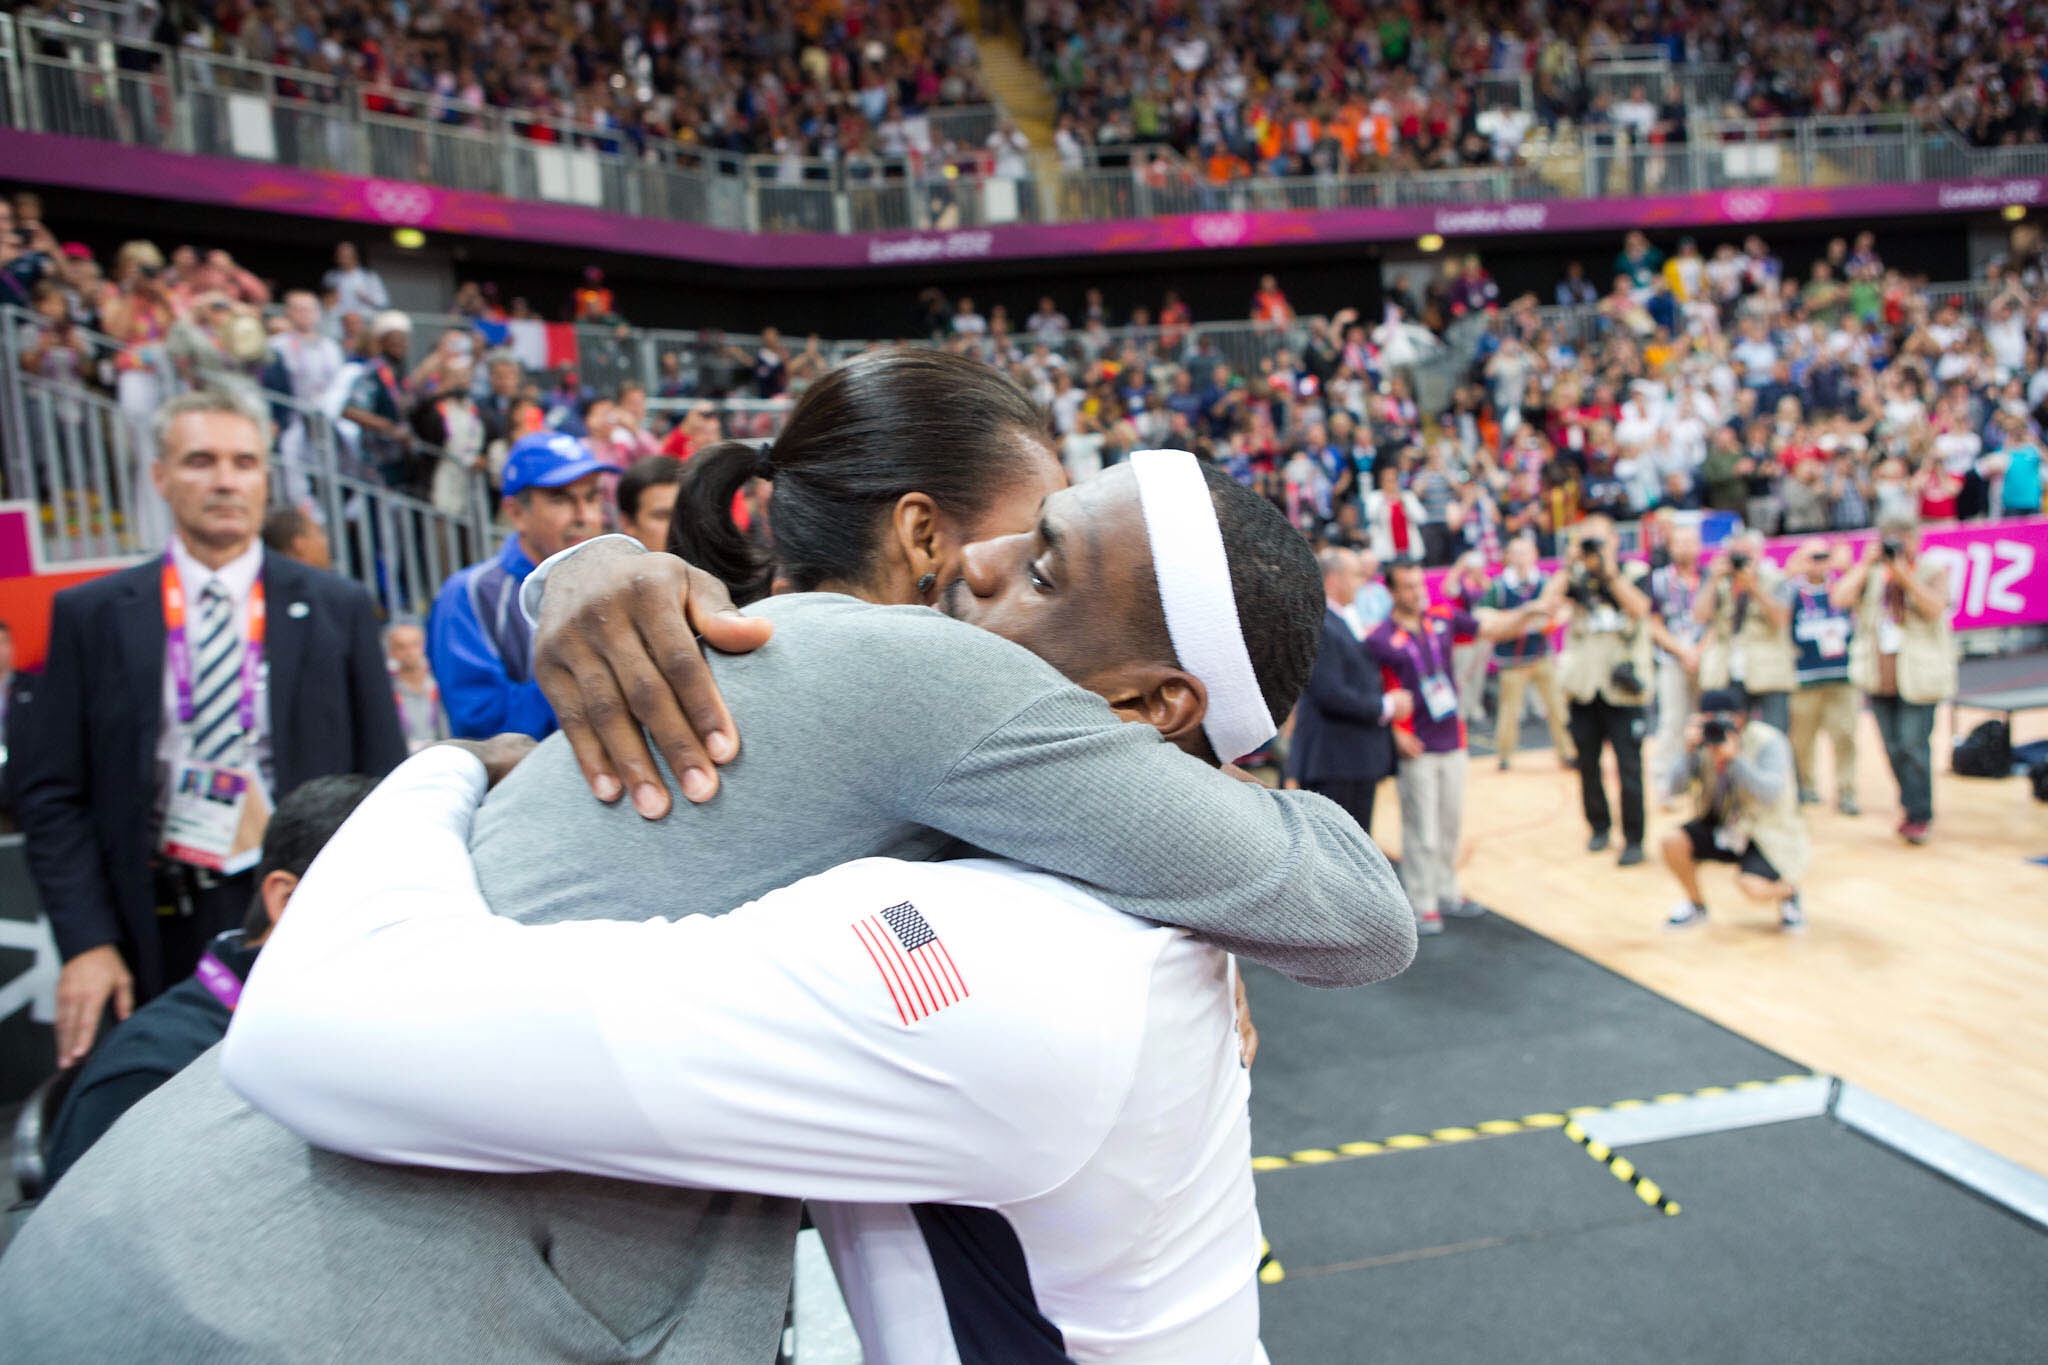 LeBron James and former US first lady Michelle Obama embrace after he put the finishing touches on his second gold medal at London 2012